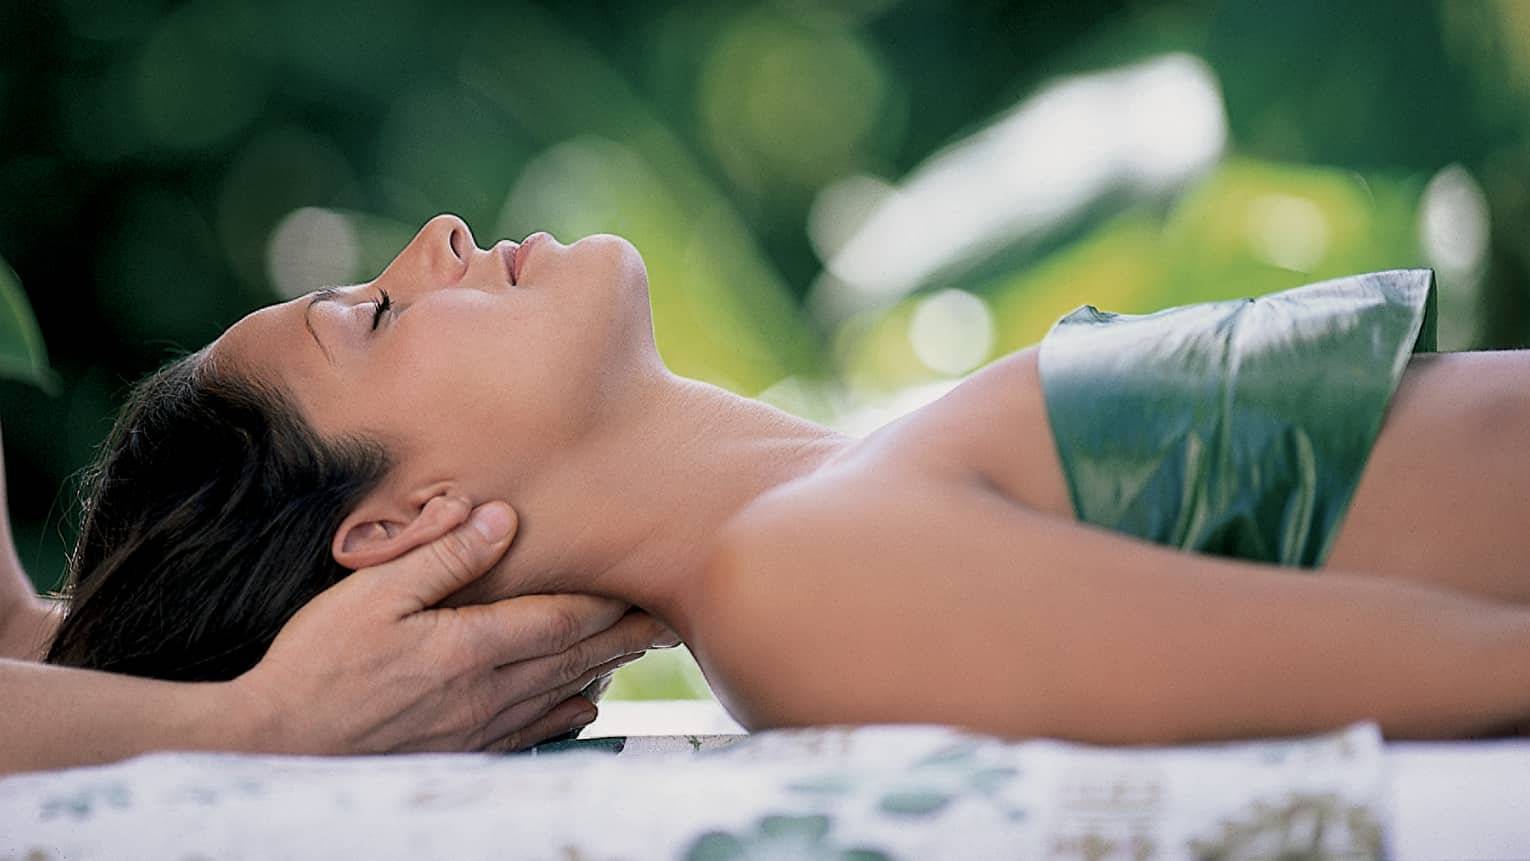 Woman with eyes closed lays on back on table with leaf over chest, hands massage her neck